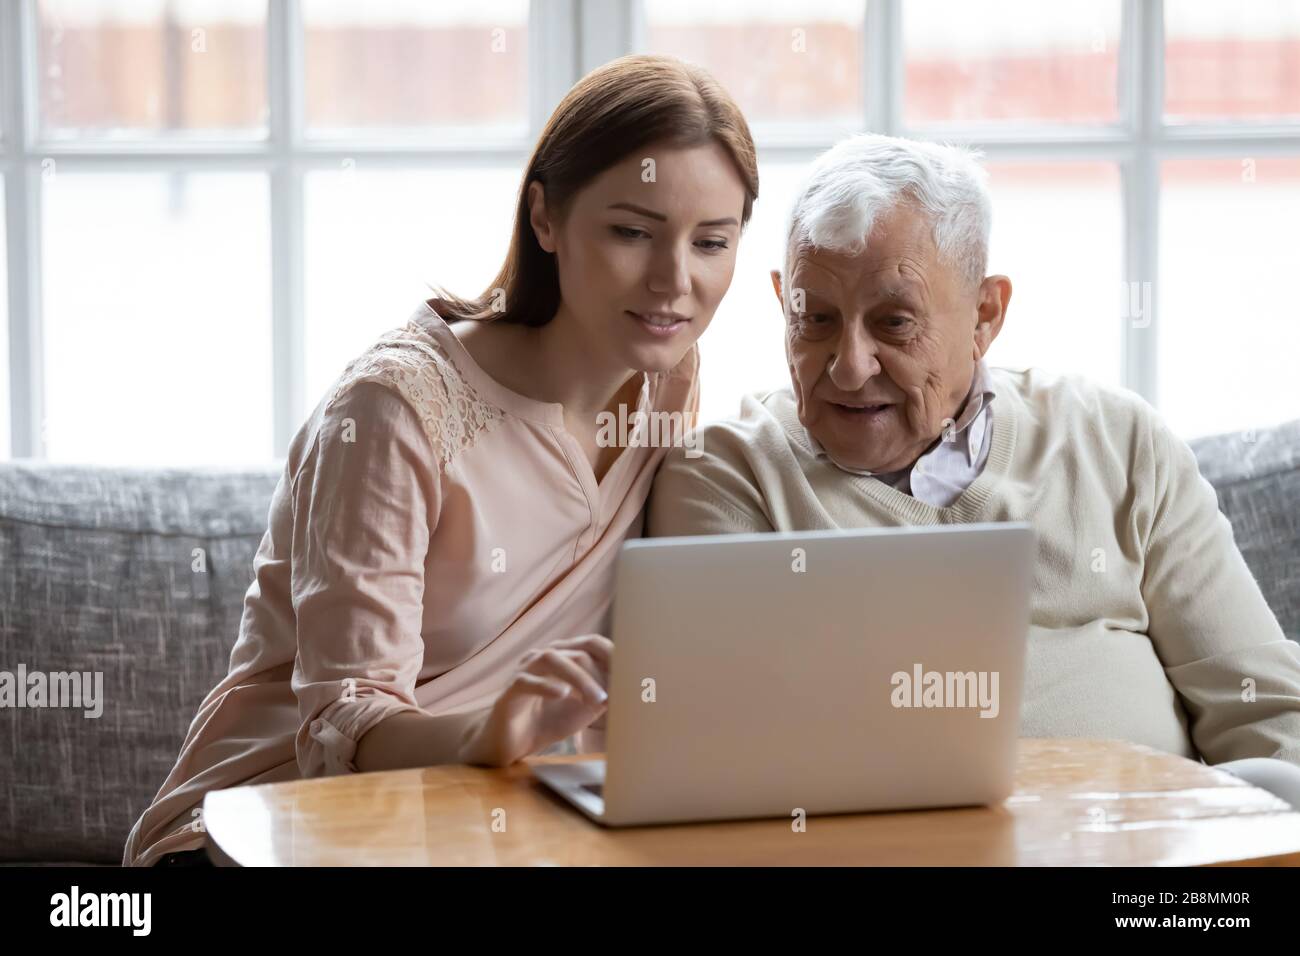 Adult daughter old father choose services via internet using computer Stock Photo